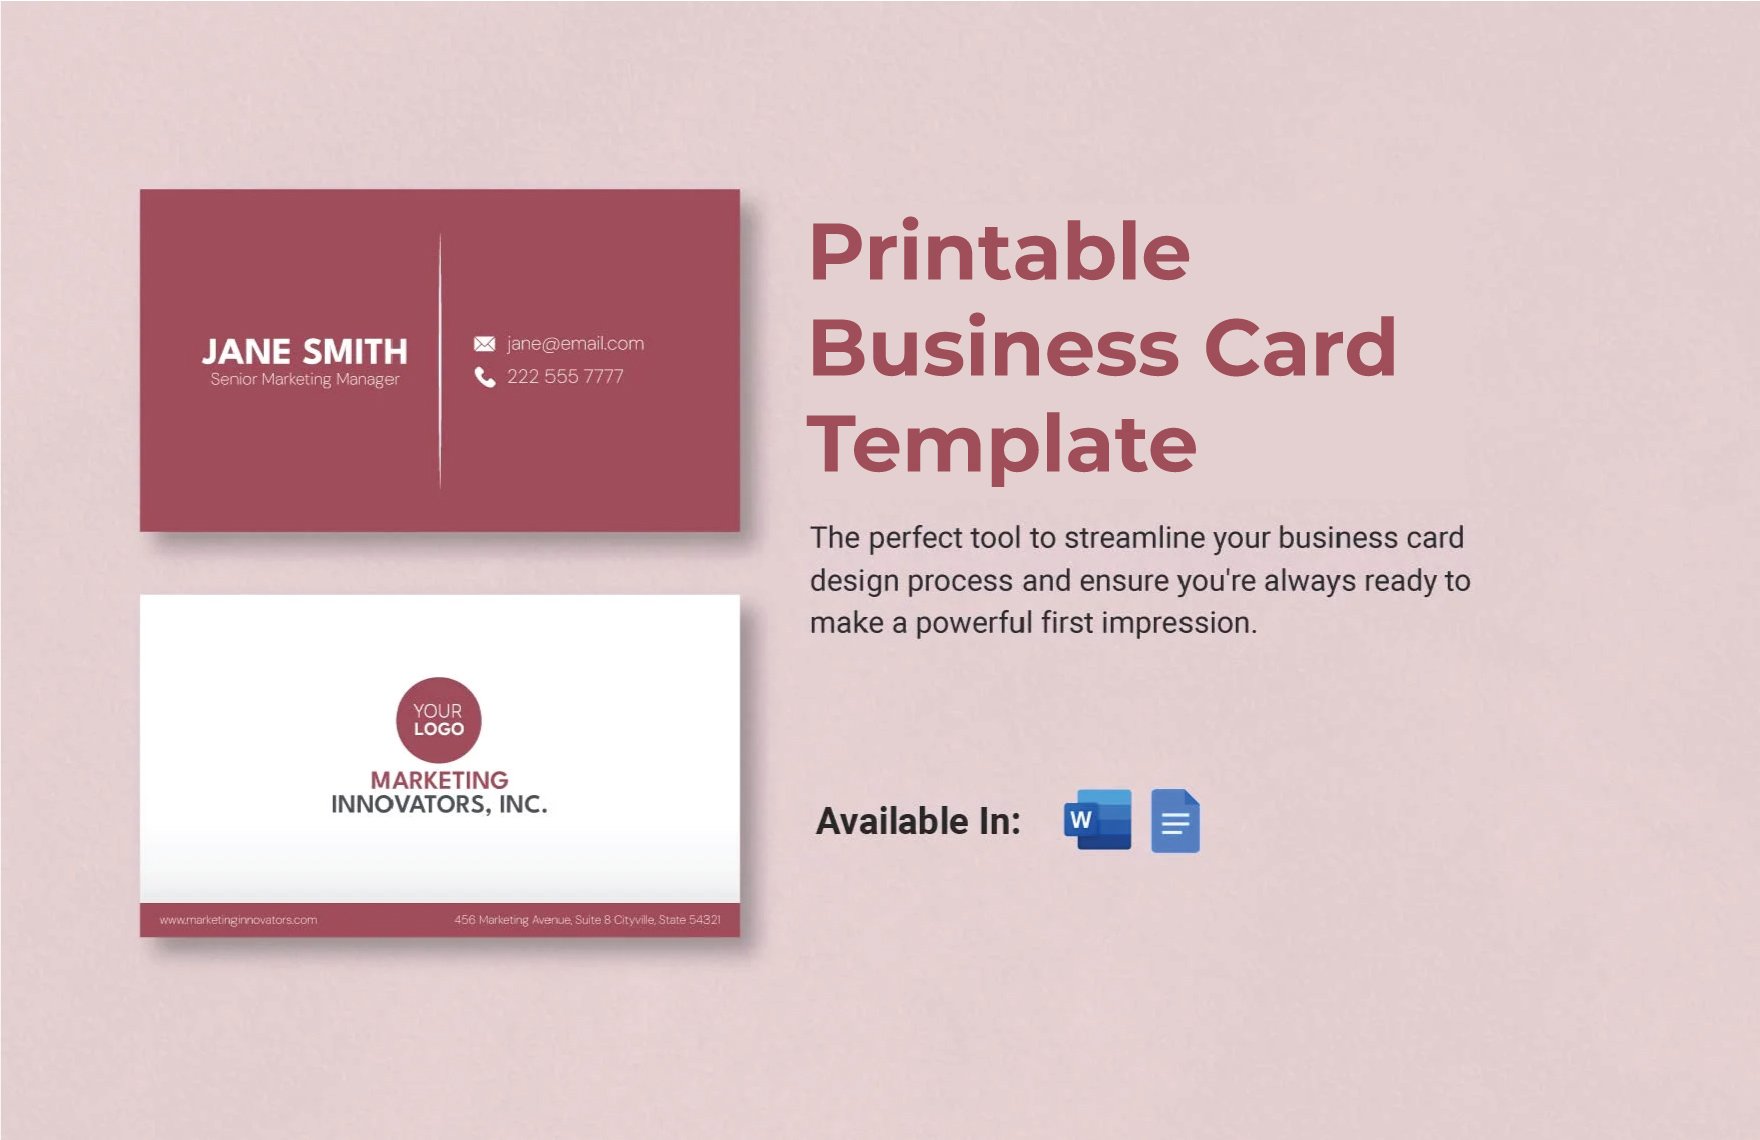 Free Printable Business Card Template in Word, Google Docs, PDF